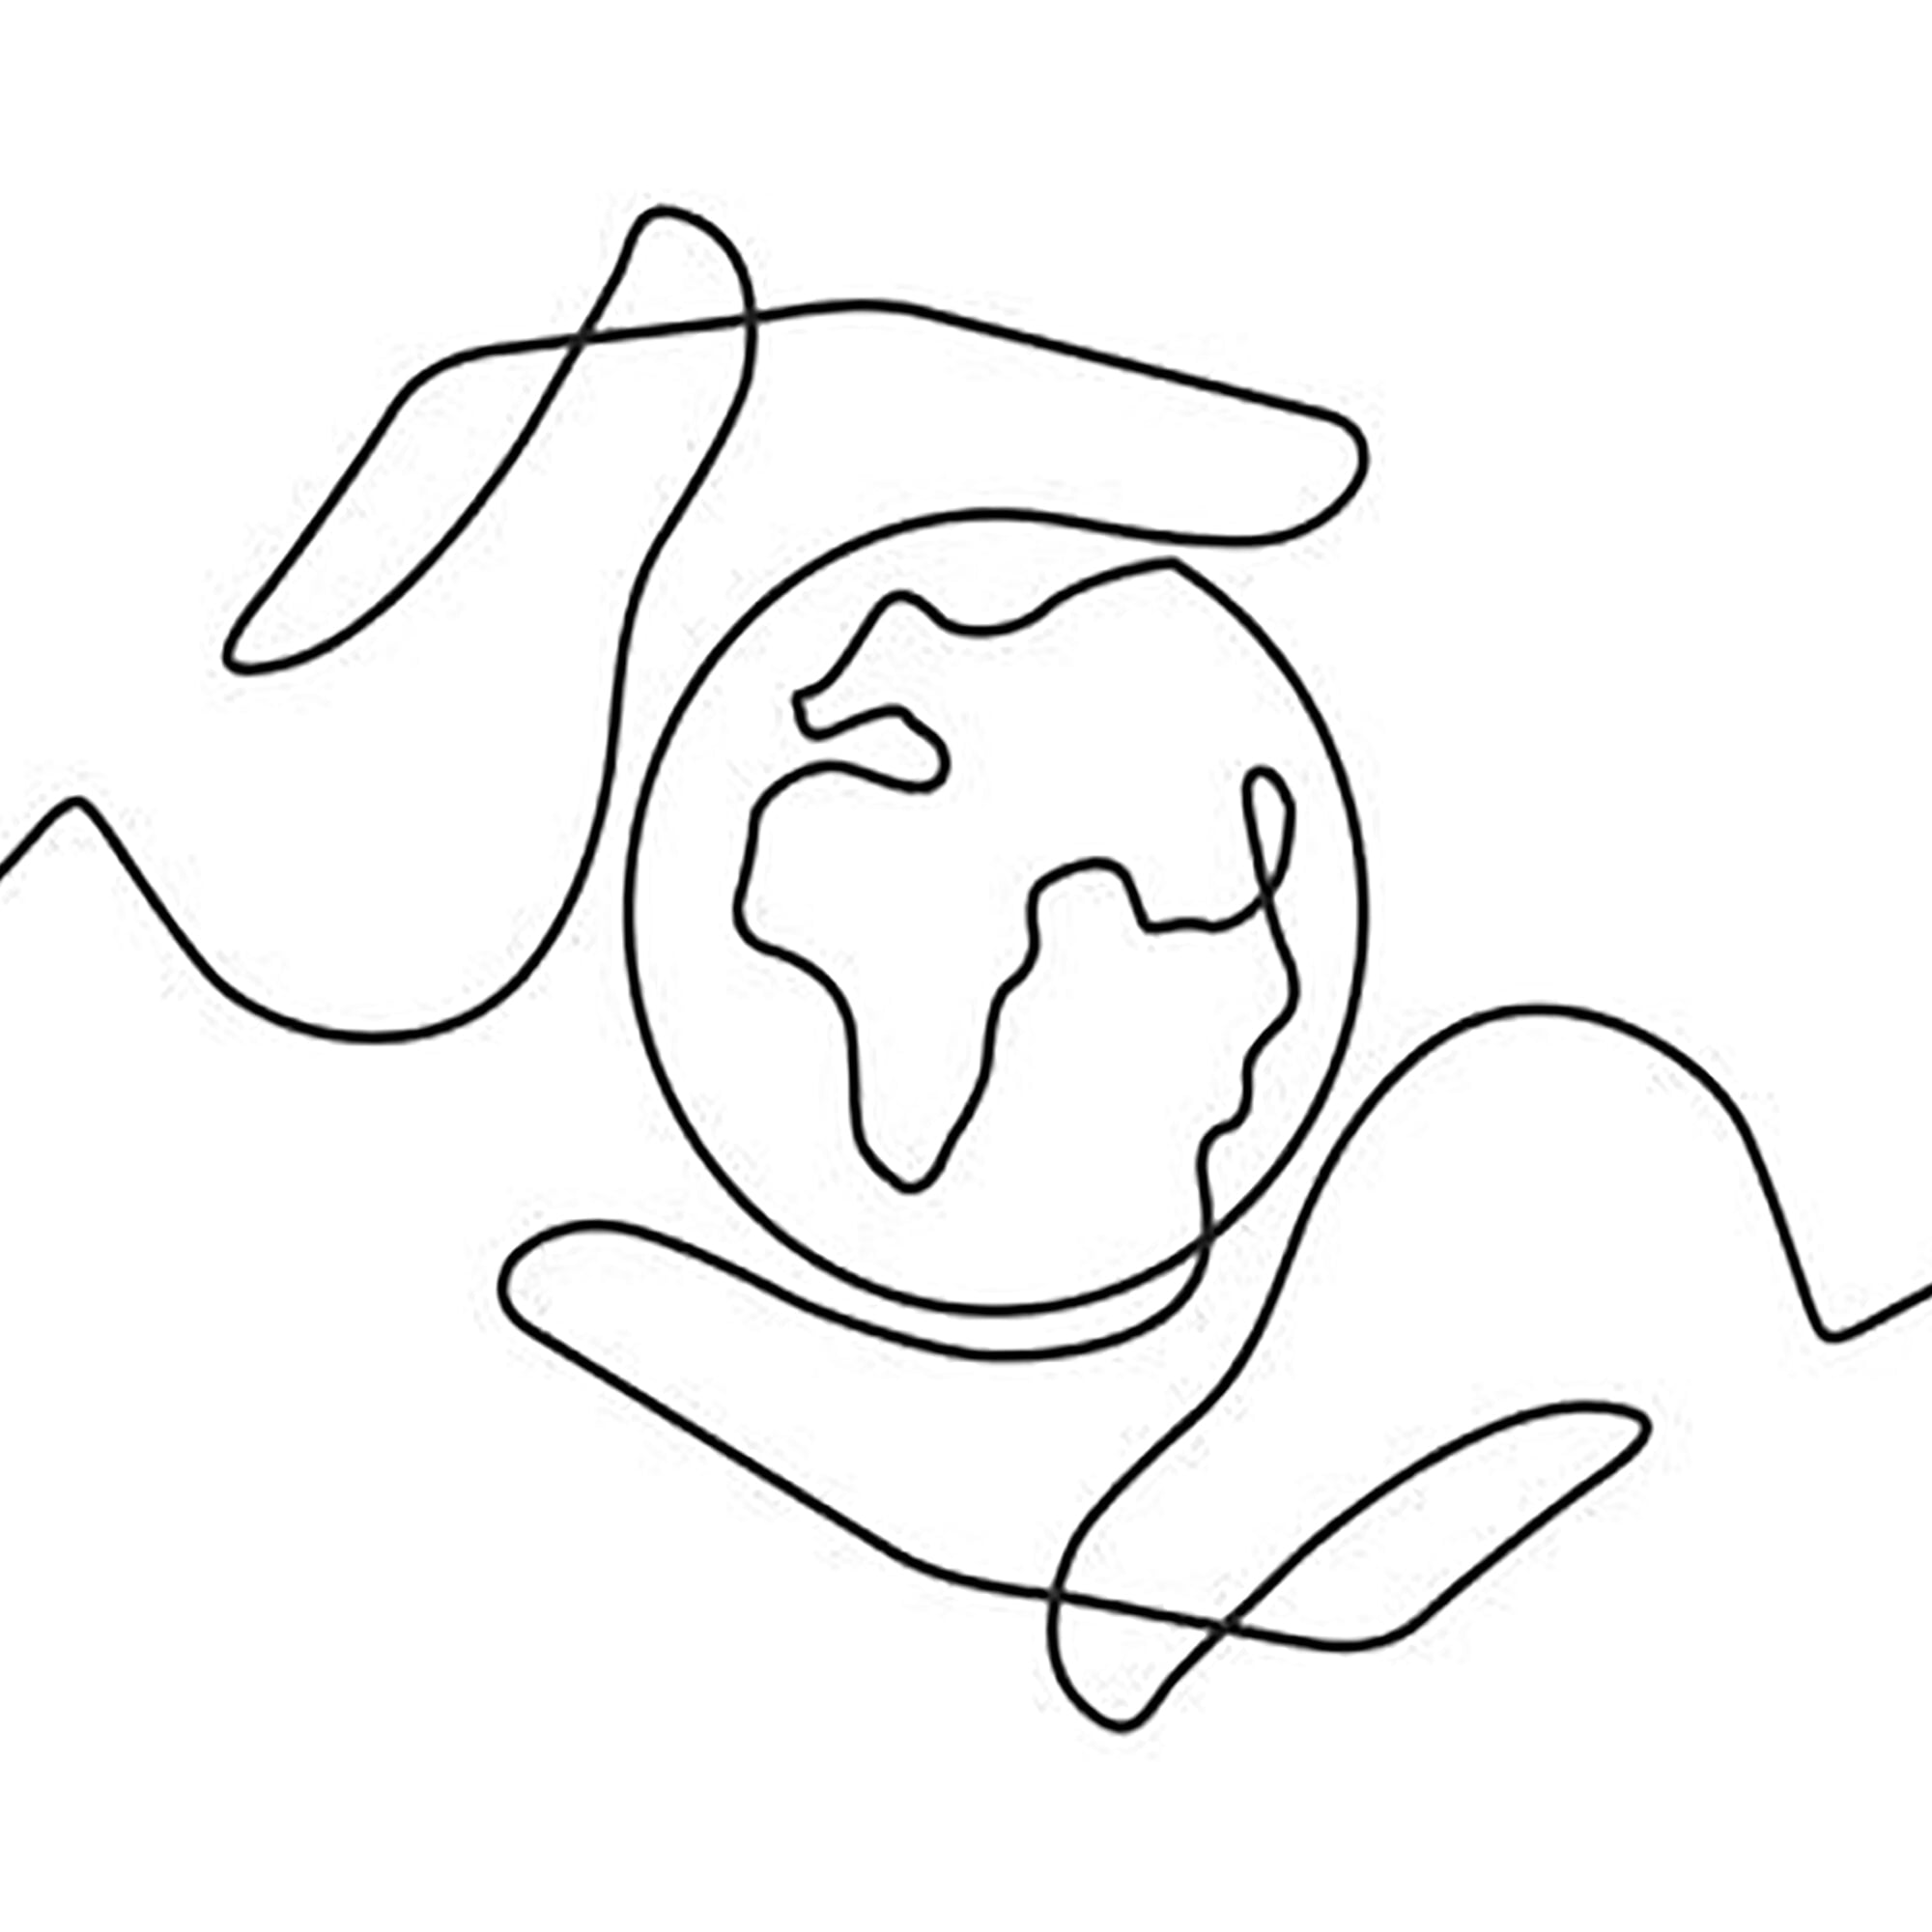 drawing of hands holding the earth